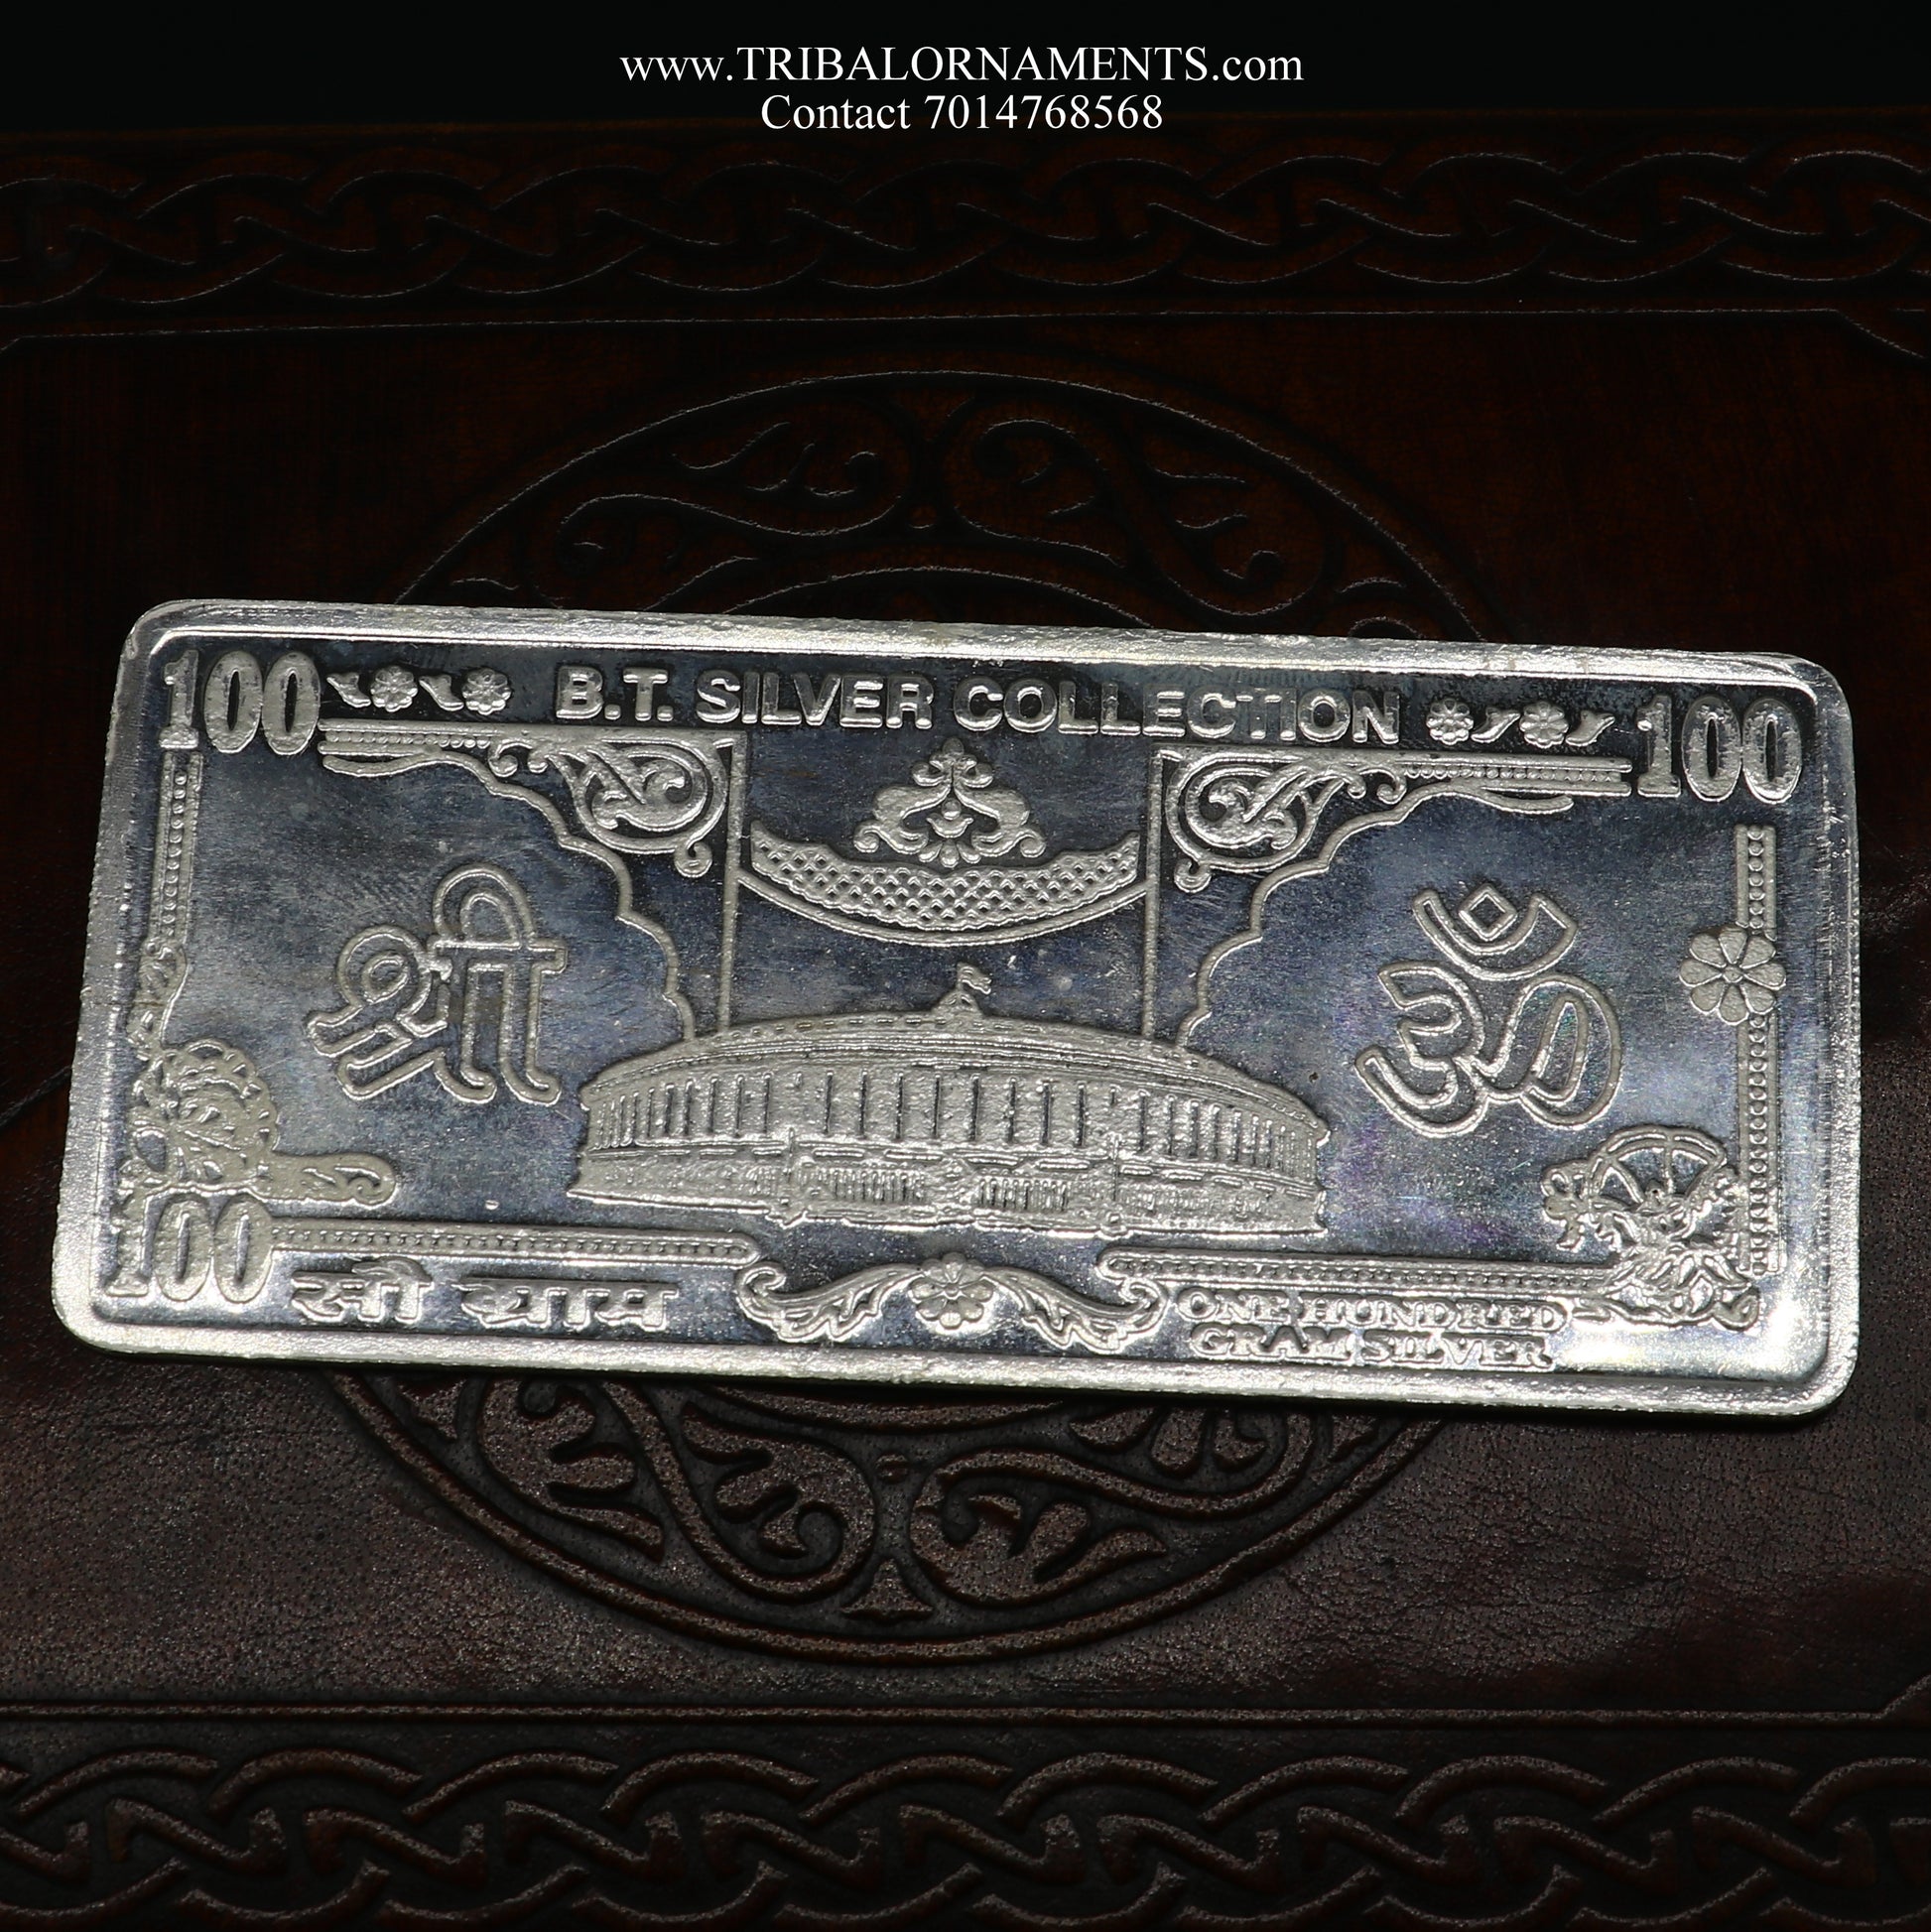 Pure Silver Bar | Silver Bar of 92.5 Purity | Silver Note | Silver bar of 5g, 10g, 20g, 100g | Silver Bar Pure for diwali. - TRIBAL ORNAMENTS